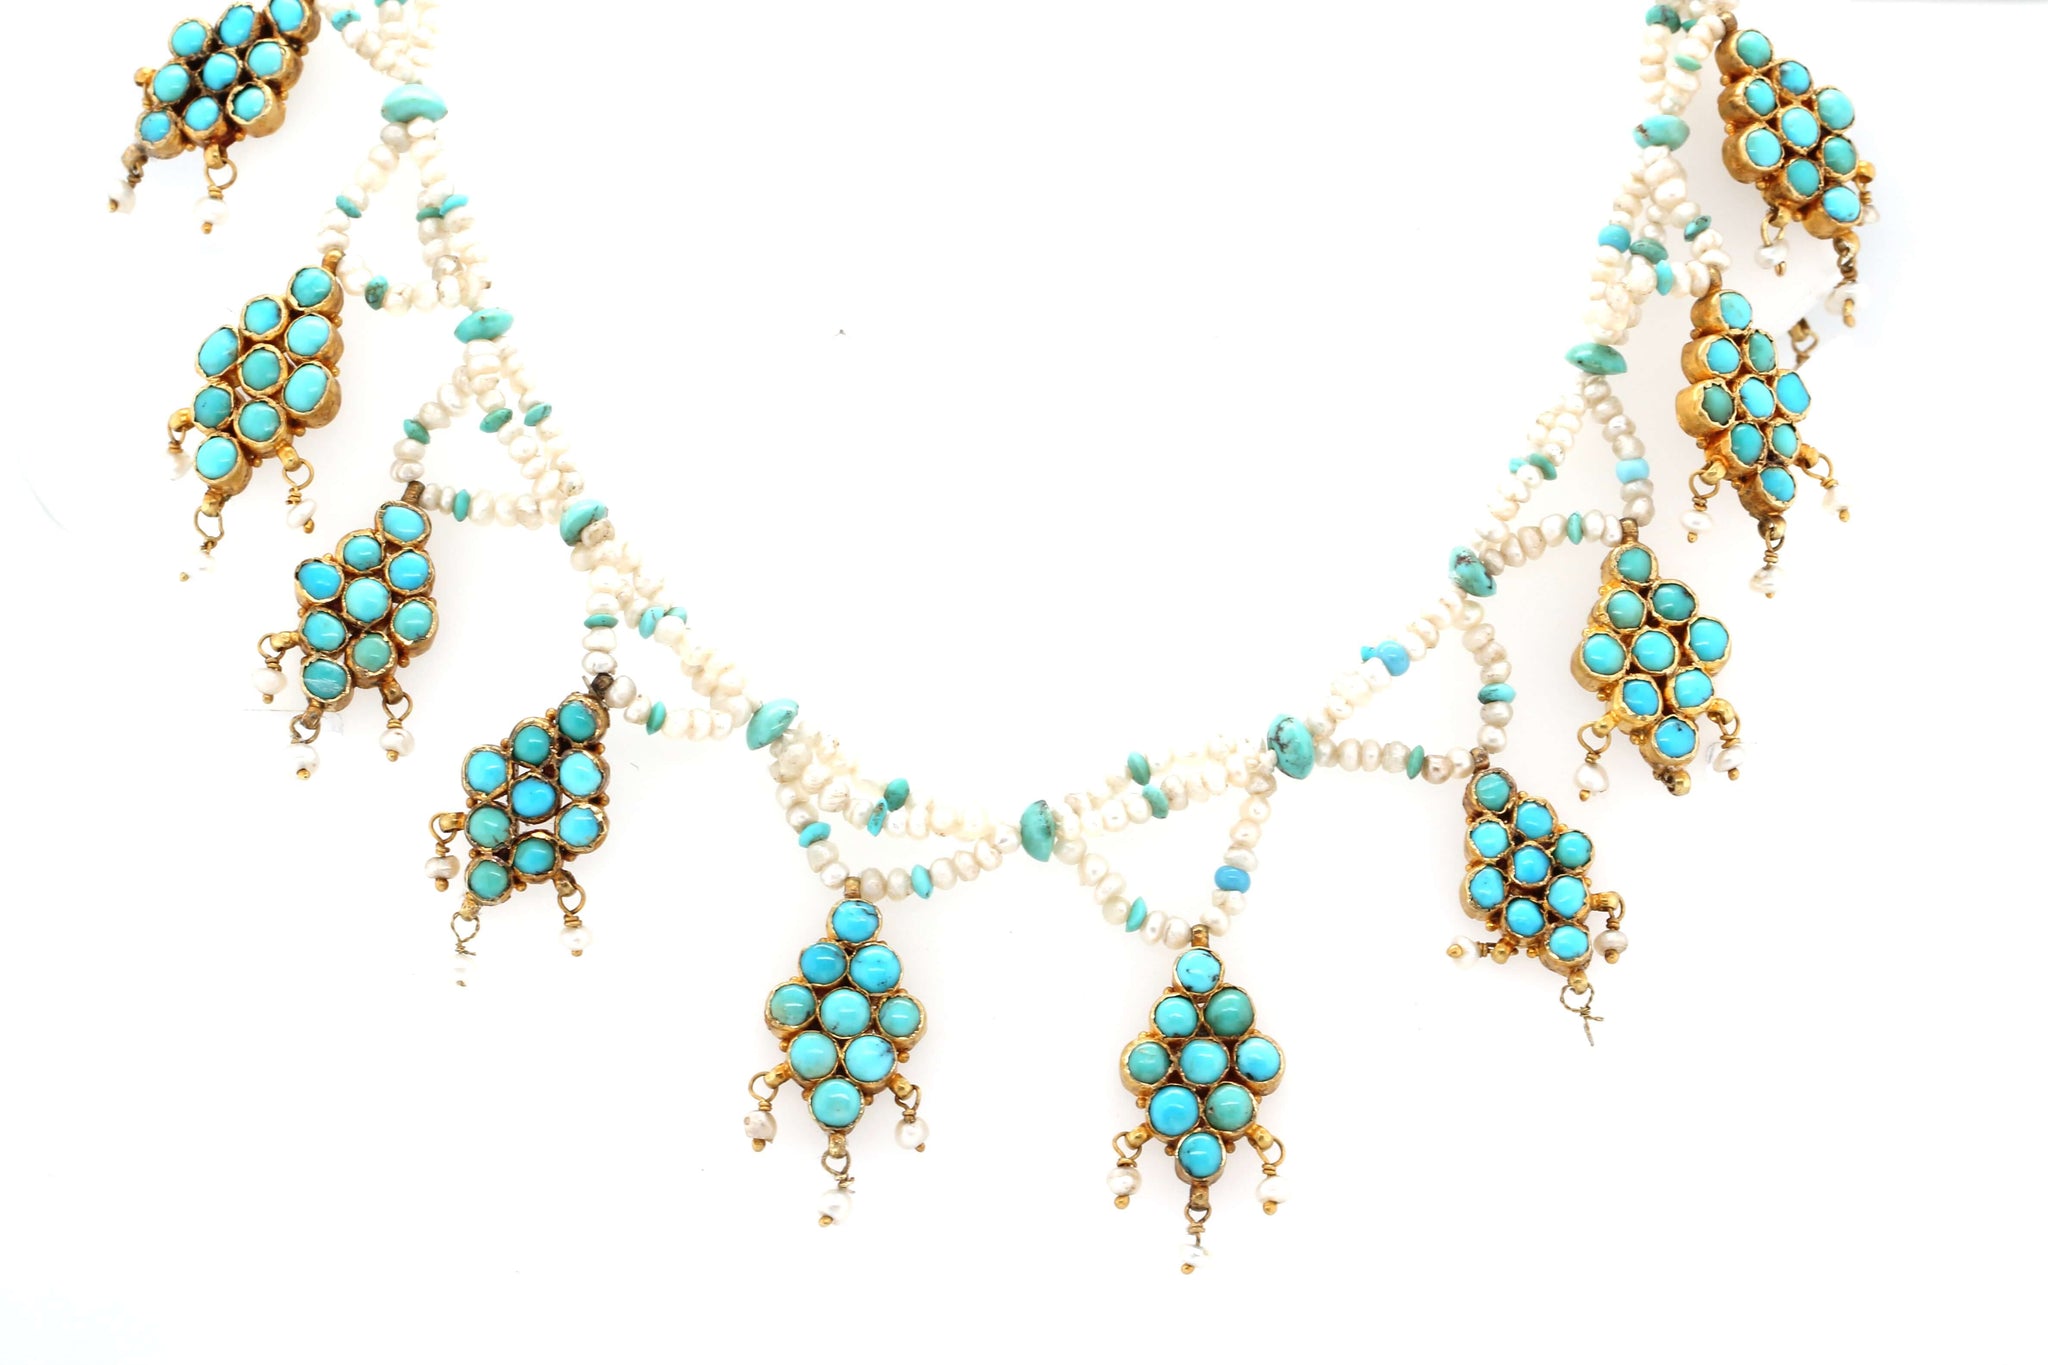 Victorian Turquoise and Pearl Necklace